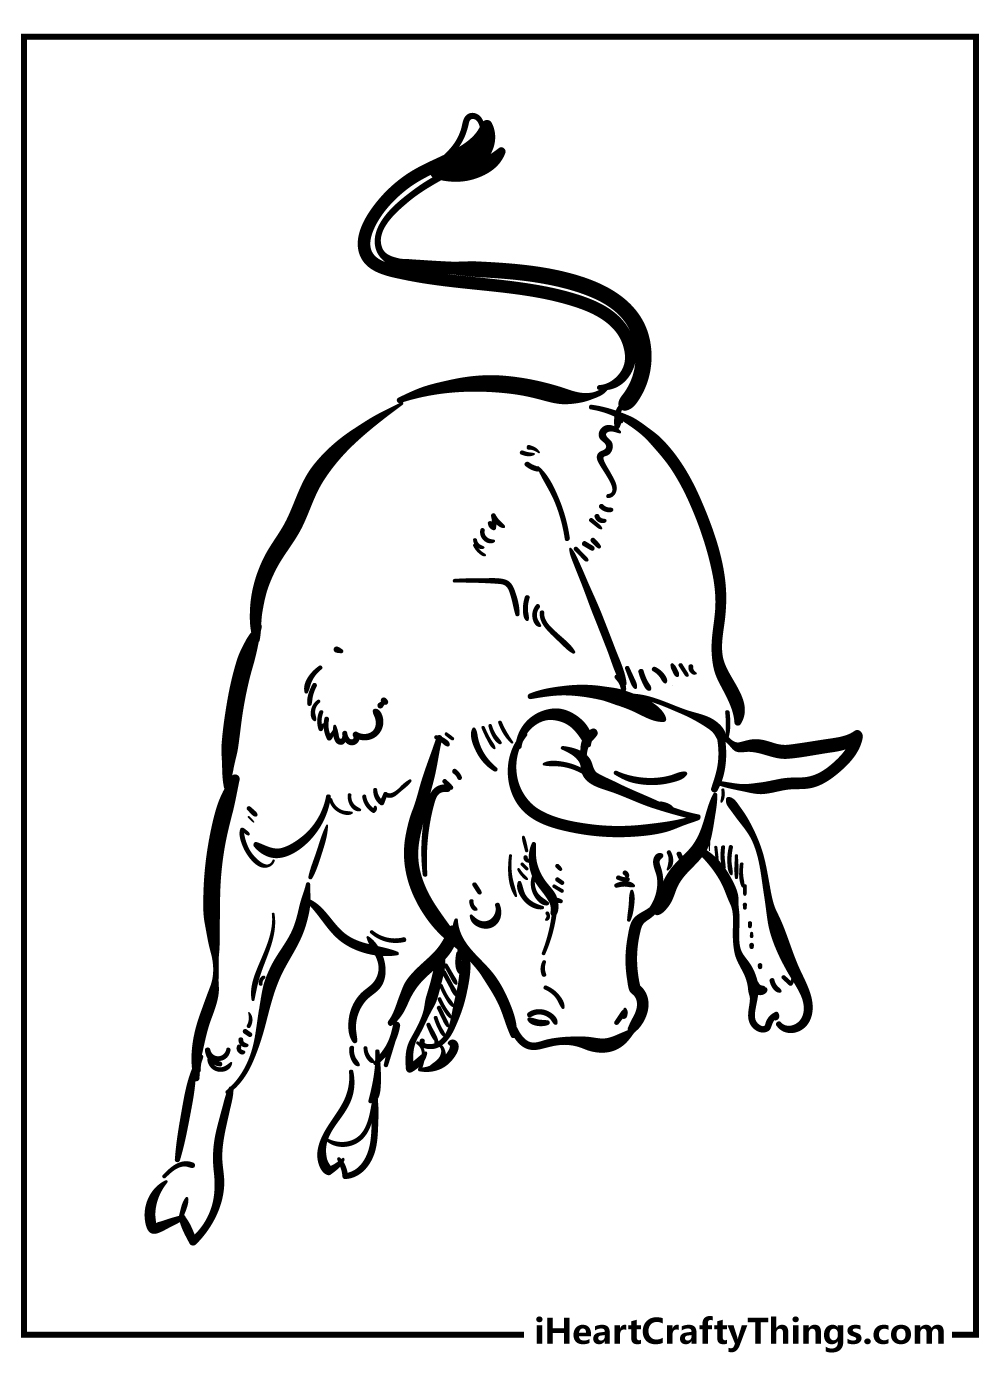 Bull Coloring Book for adults free download